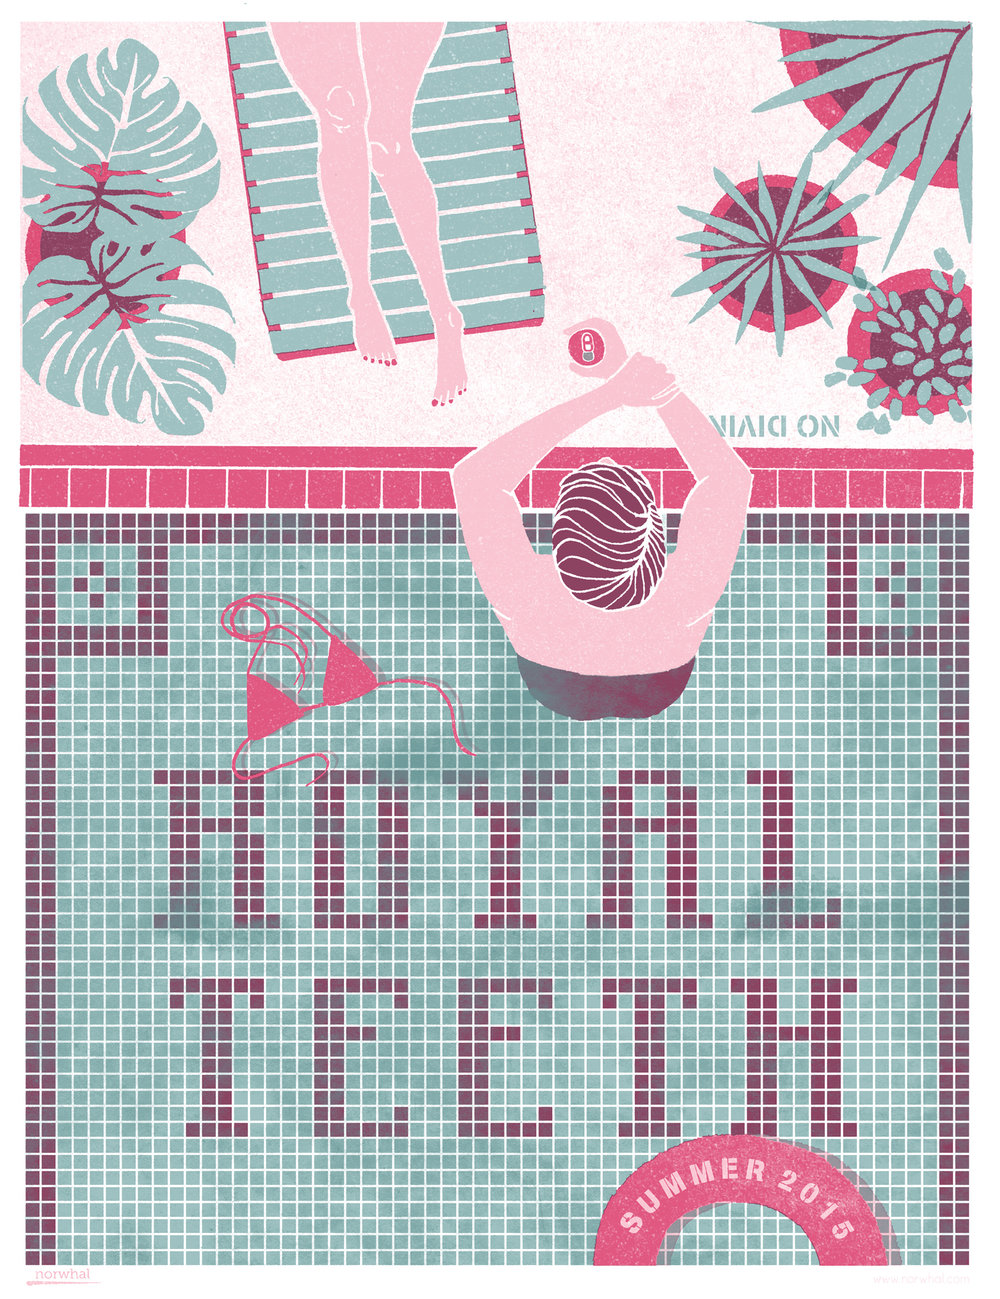 Royal Teeth Screen Print by Nora Patterson (image courtesy of the artist)